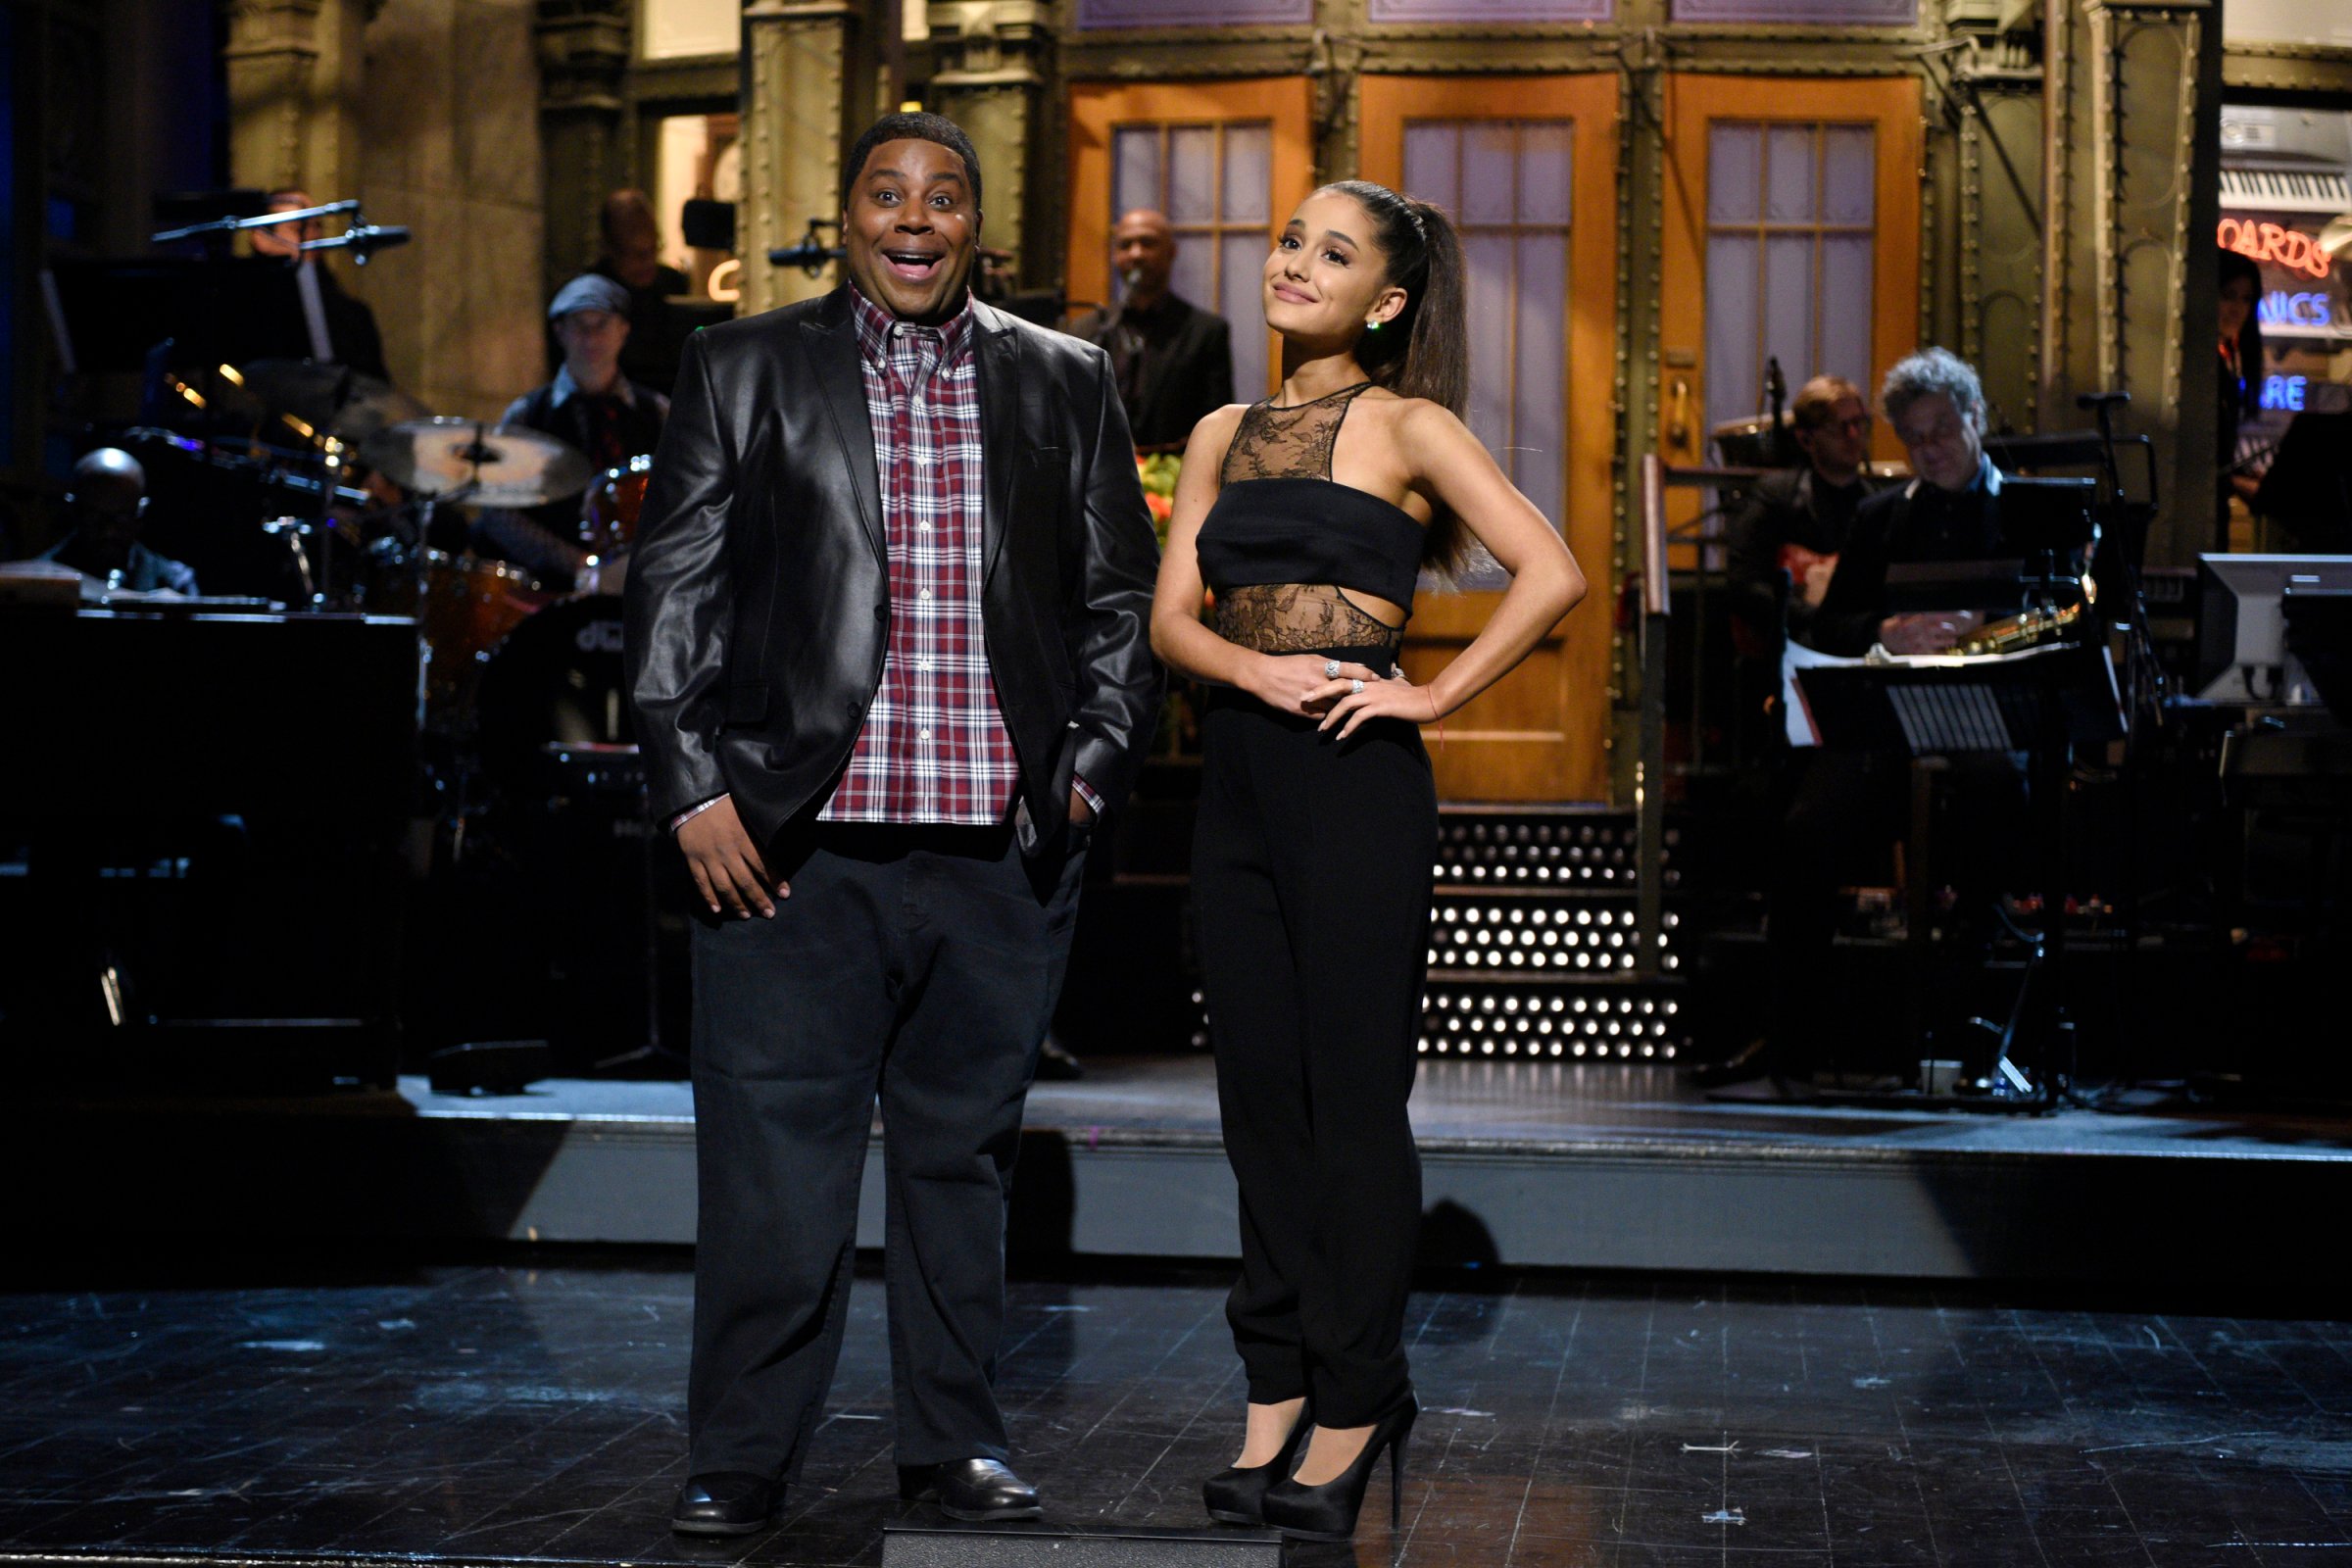 Kenan Thompson and host Ariana Grande during the Saturday Night Live monologue on March 12, 2016.